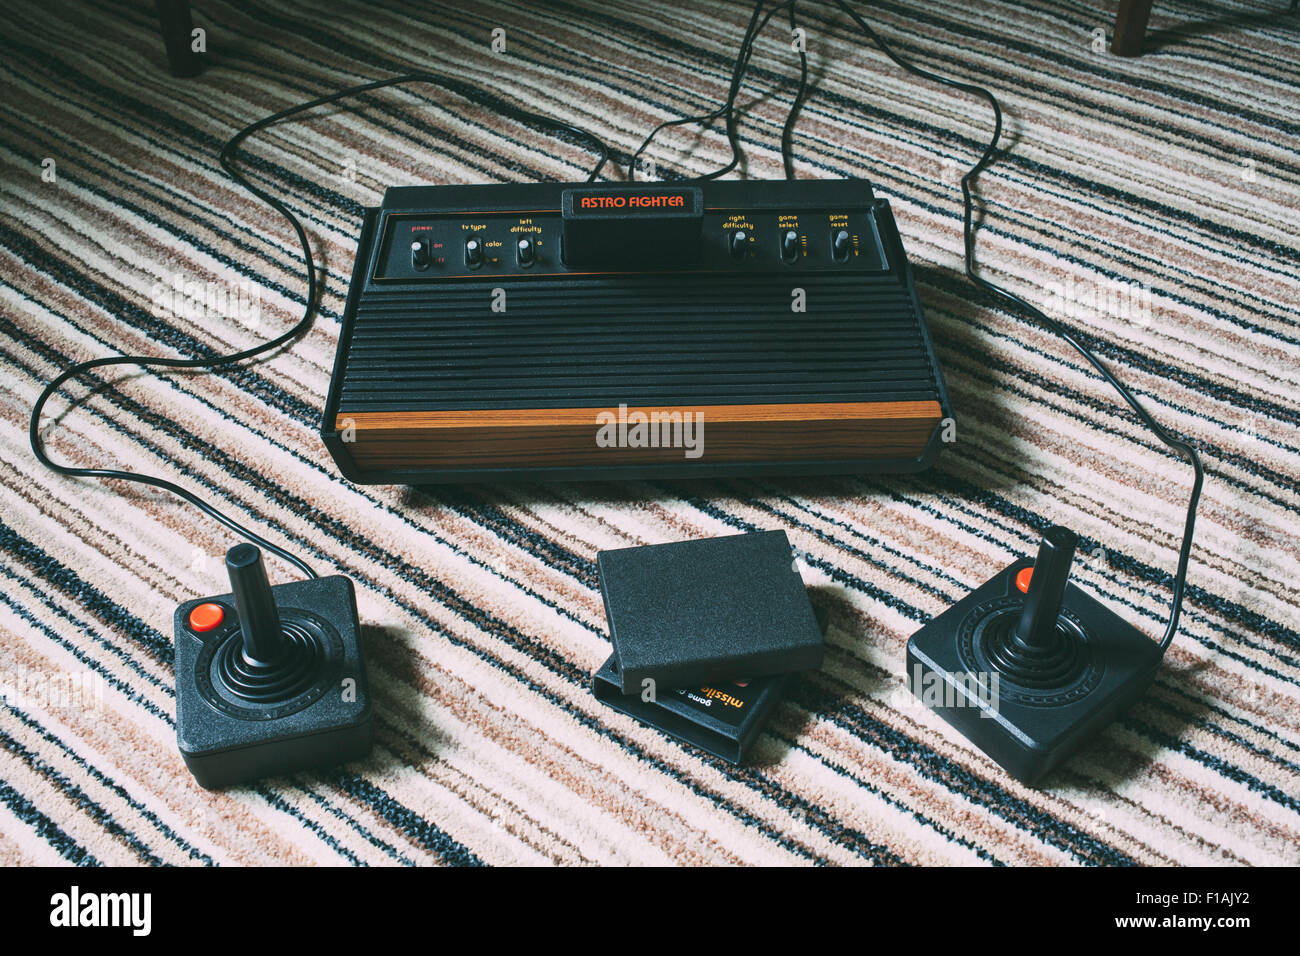 Retro Atari 2600 1970's video game console with cartridges and two joysticks Stock Photo